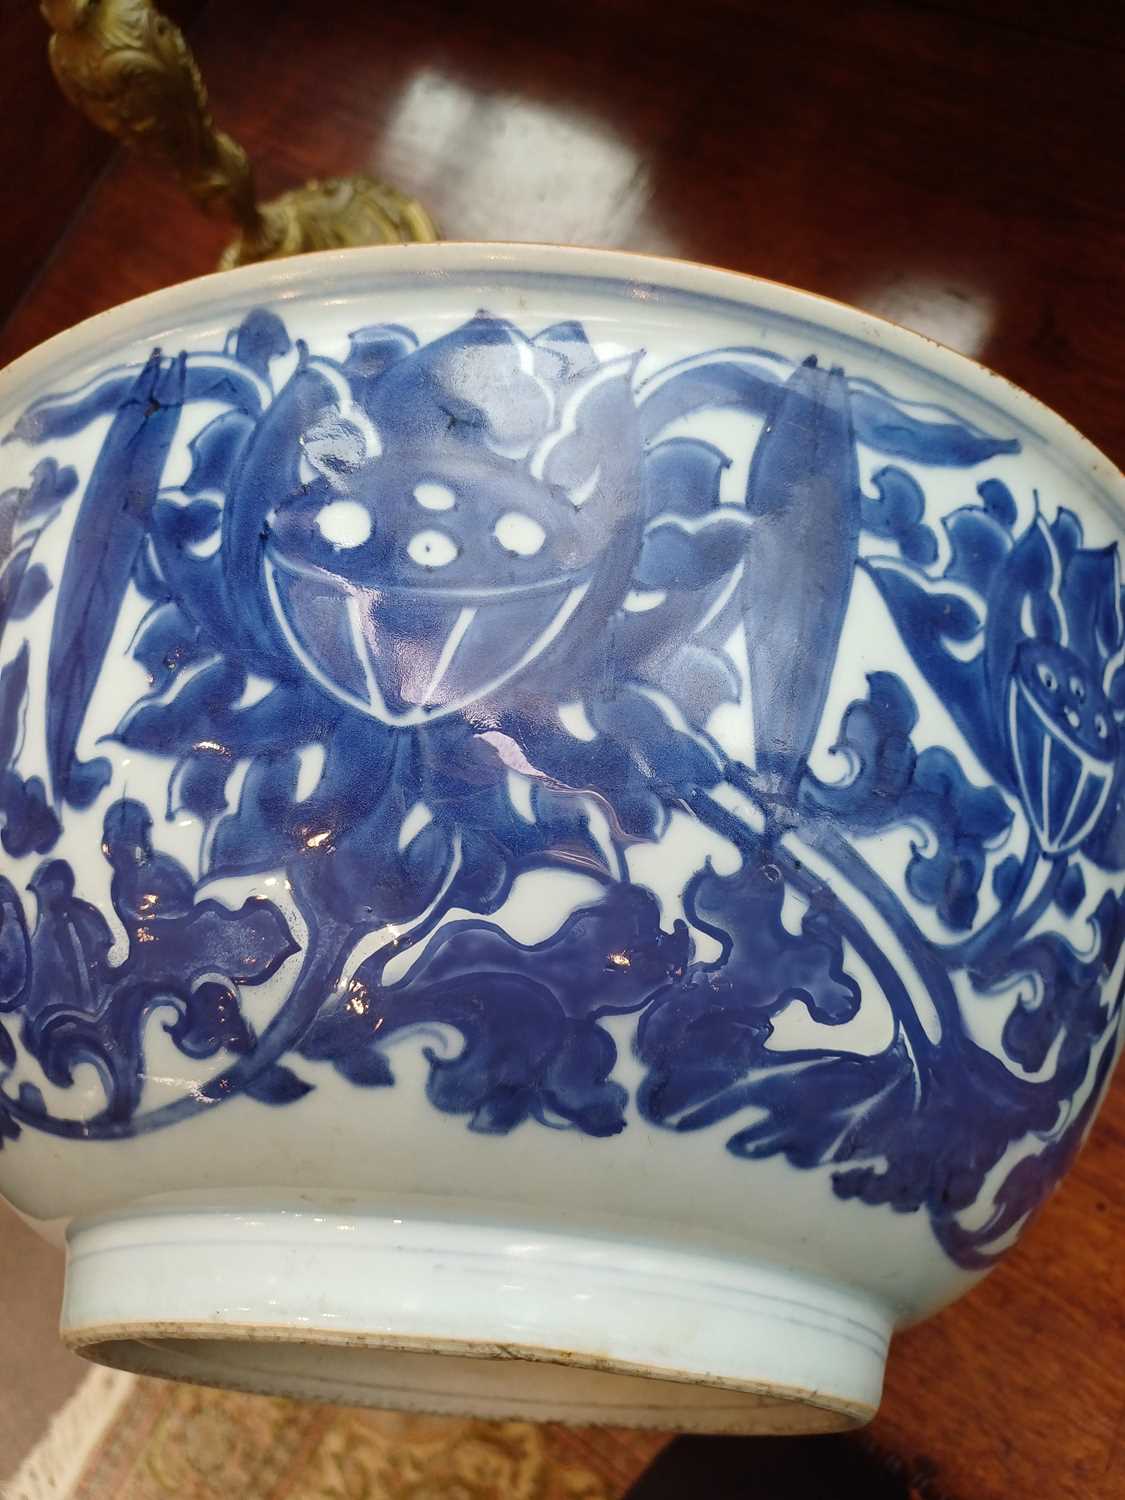 A Chinese Porcelain Punch Bowl, 19th century, with everted rim edged in copper glaze, painted in - Image 6 of 8